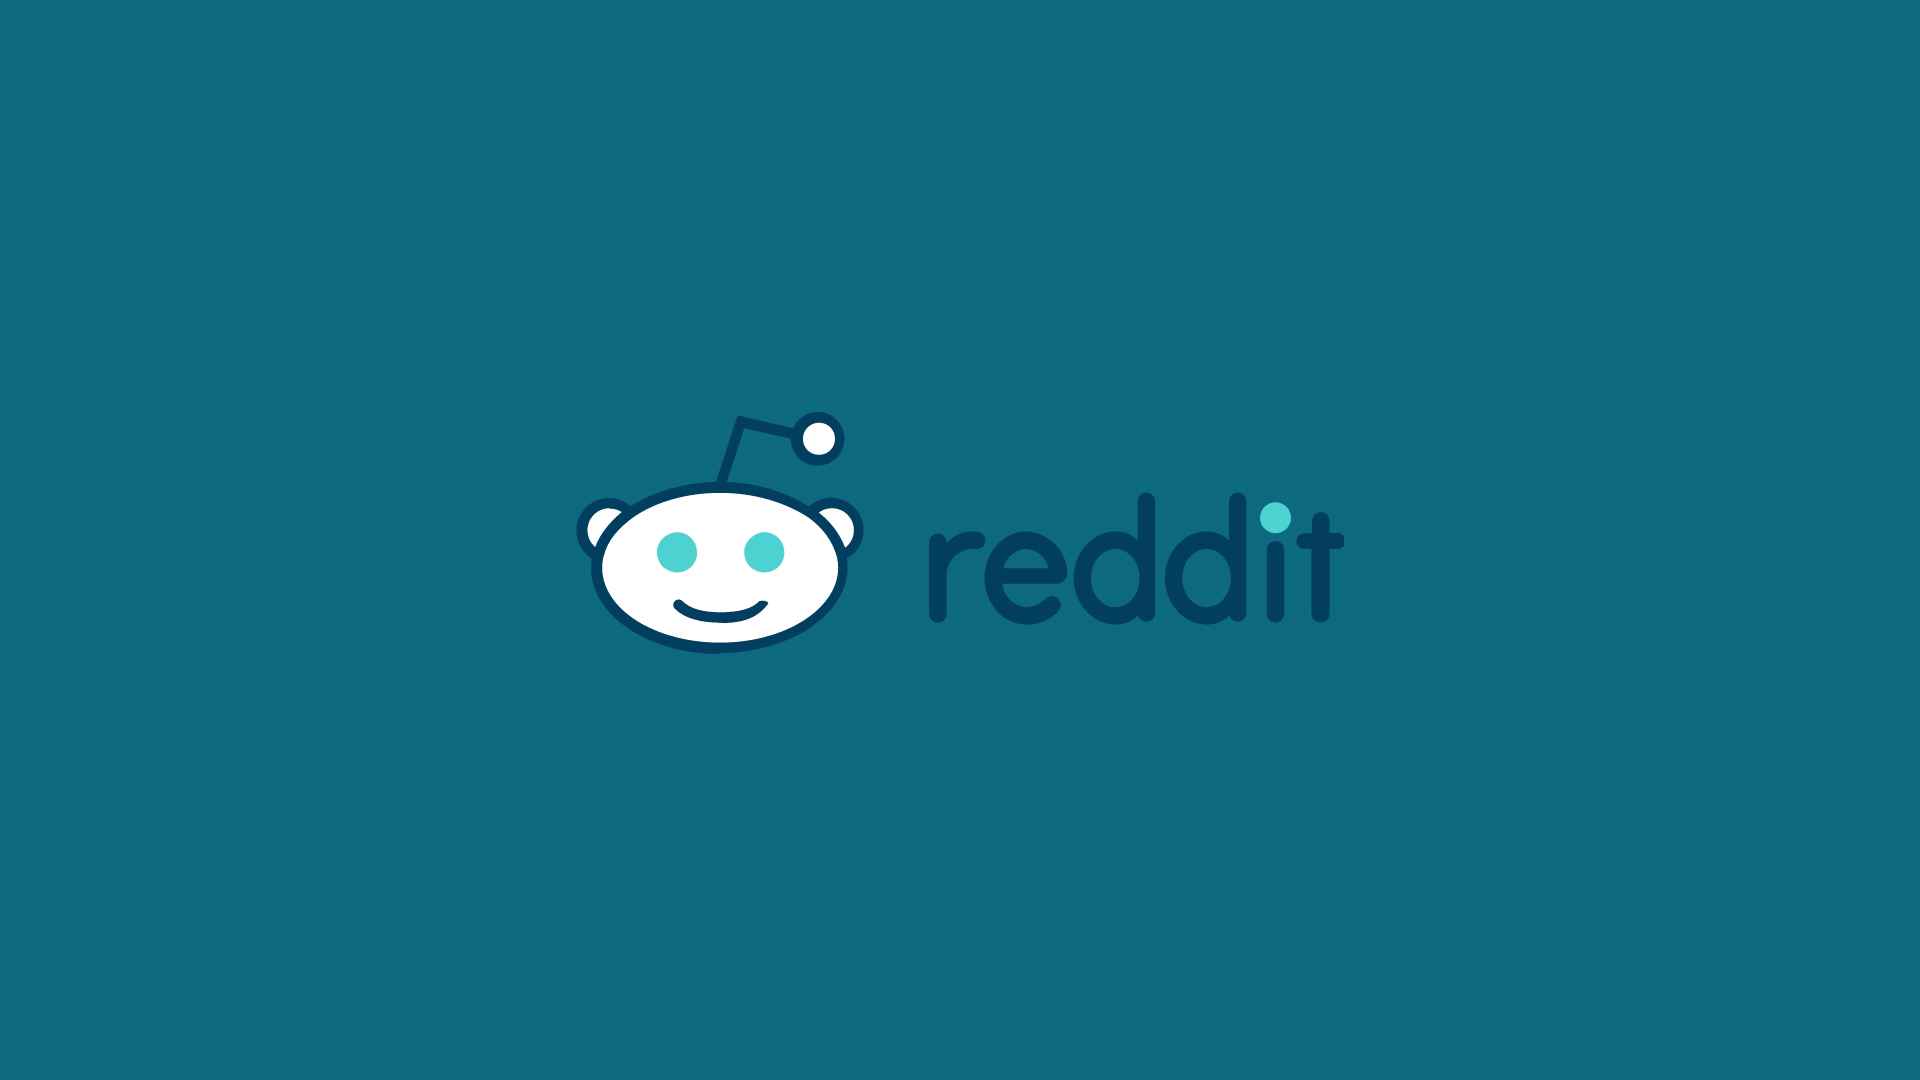 What are some popular subreddits that cater to specific interests or hobbies?